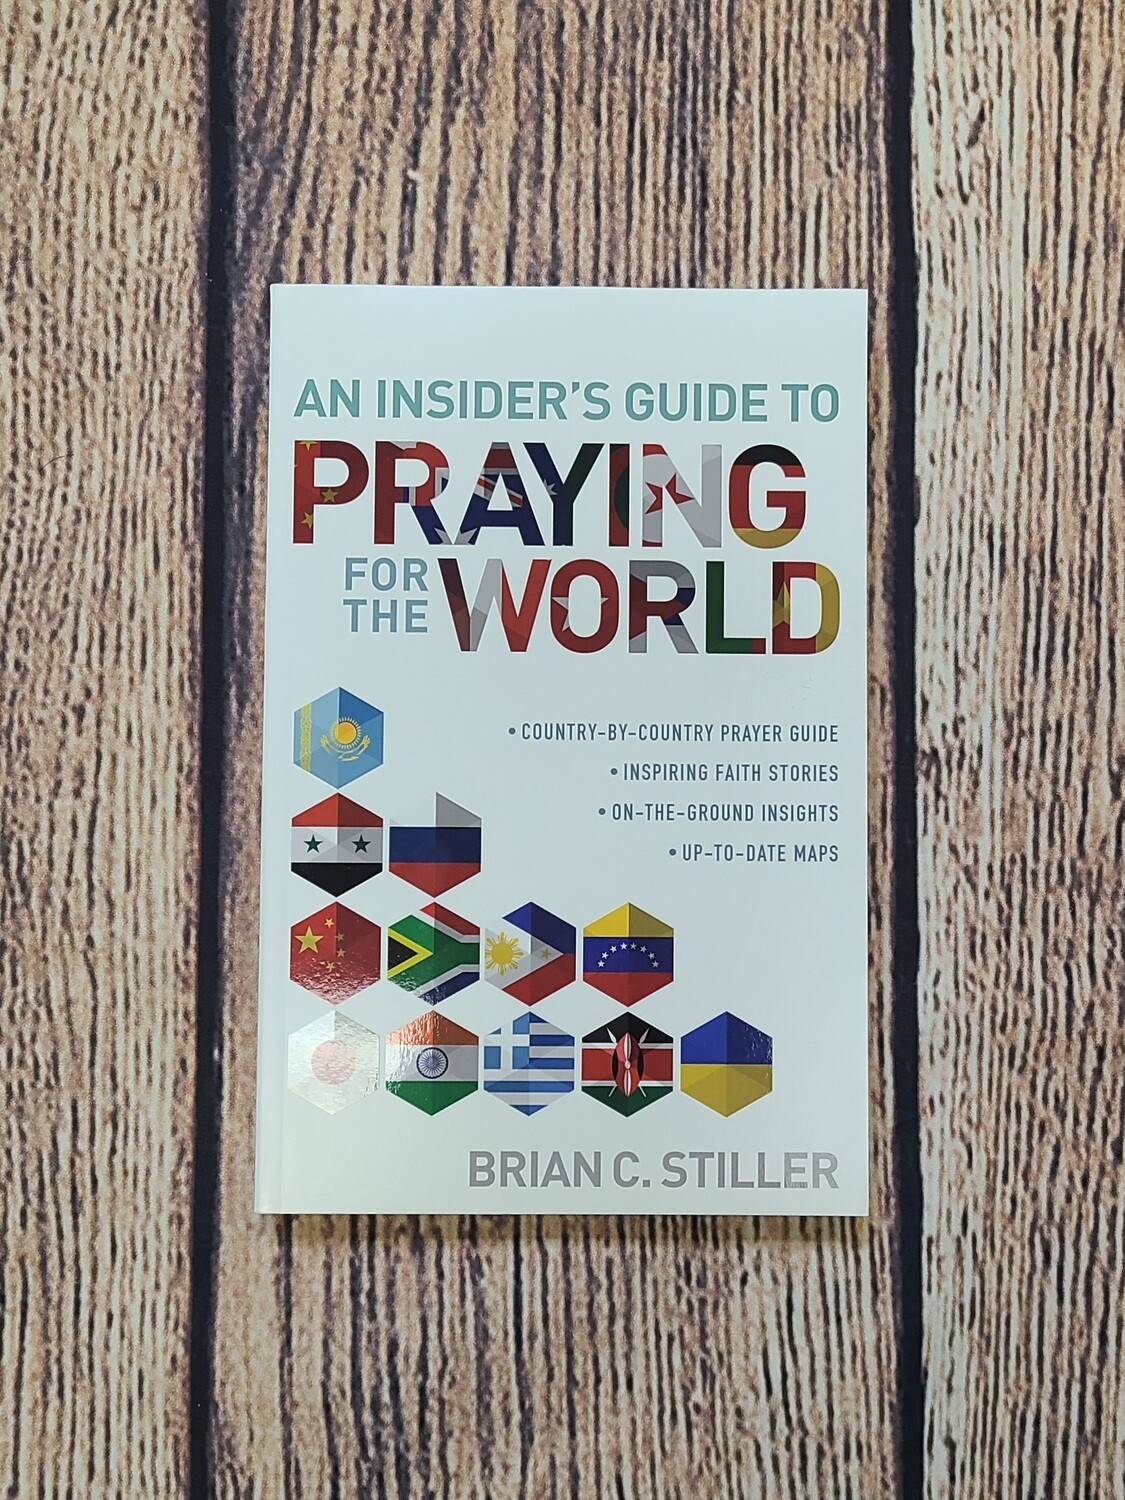 An Insider's Guide to Praying for the World by Brian C. Stiller